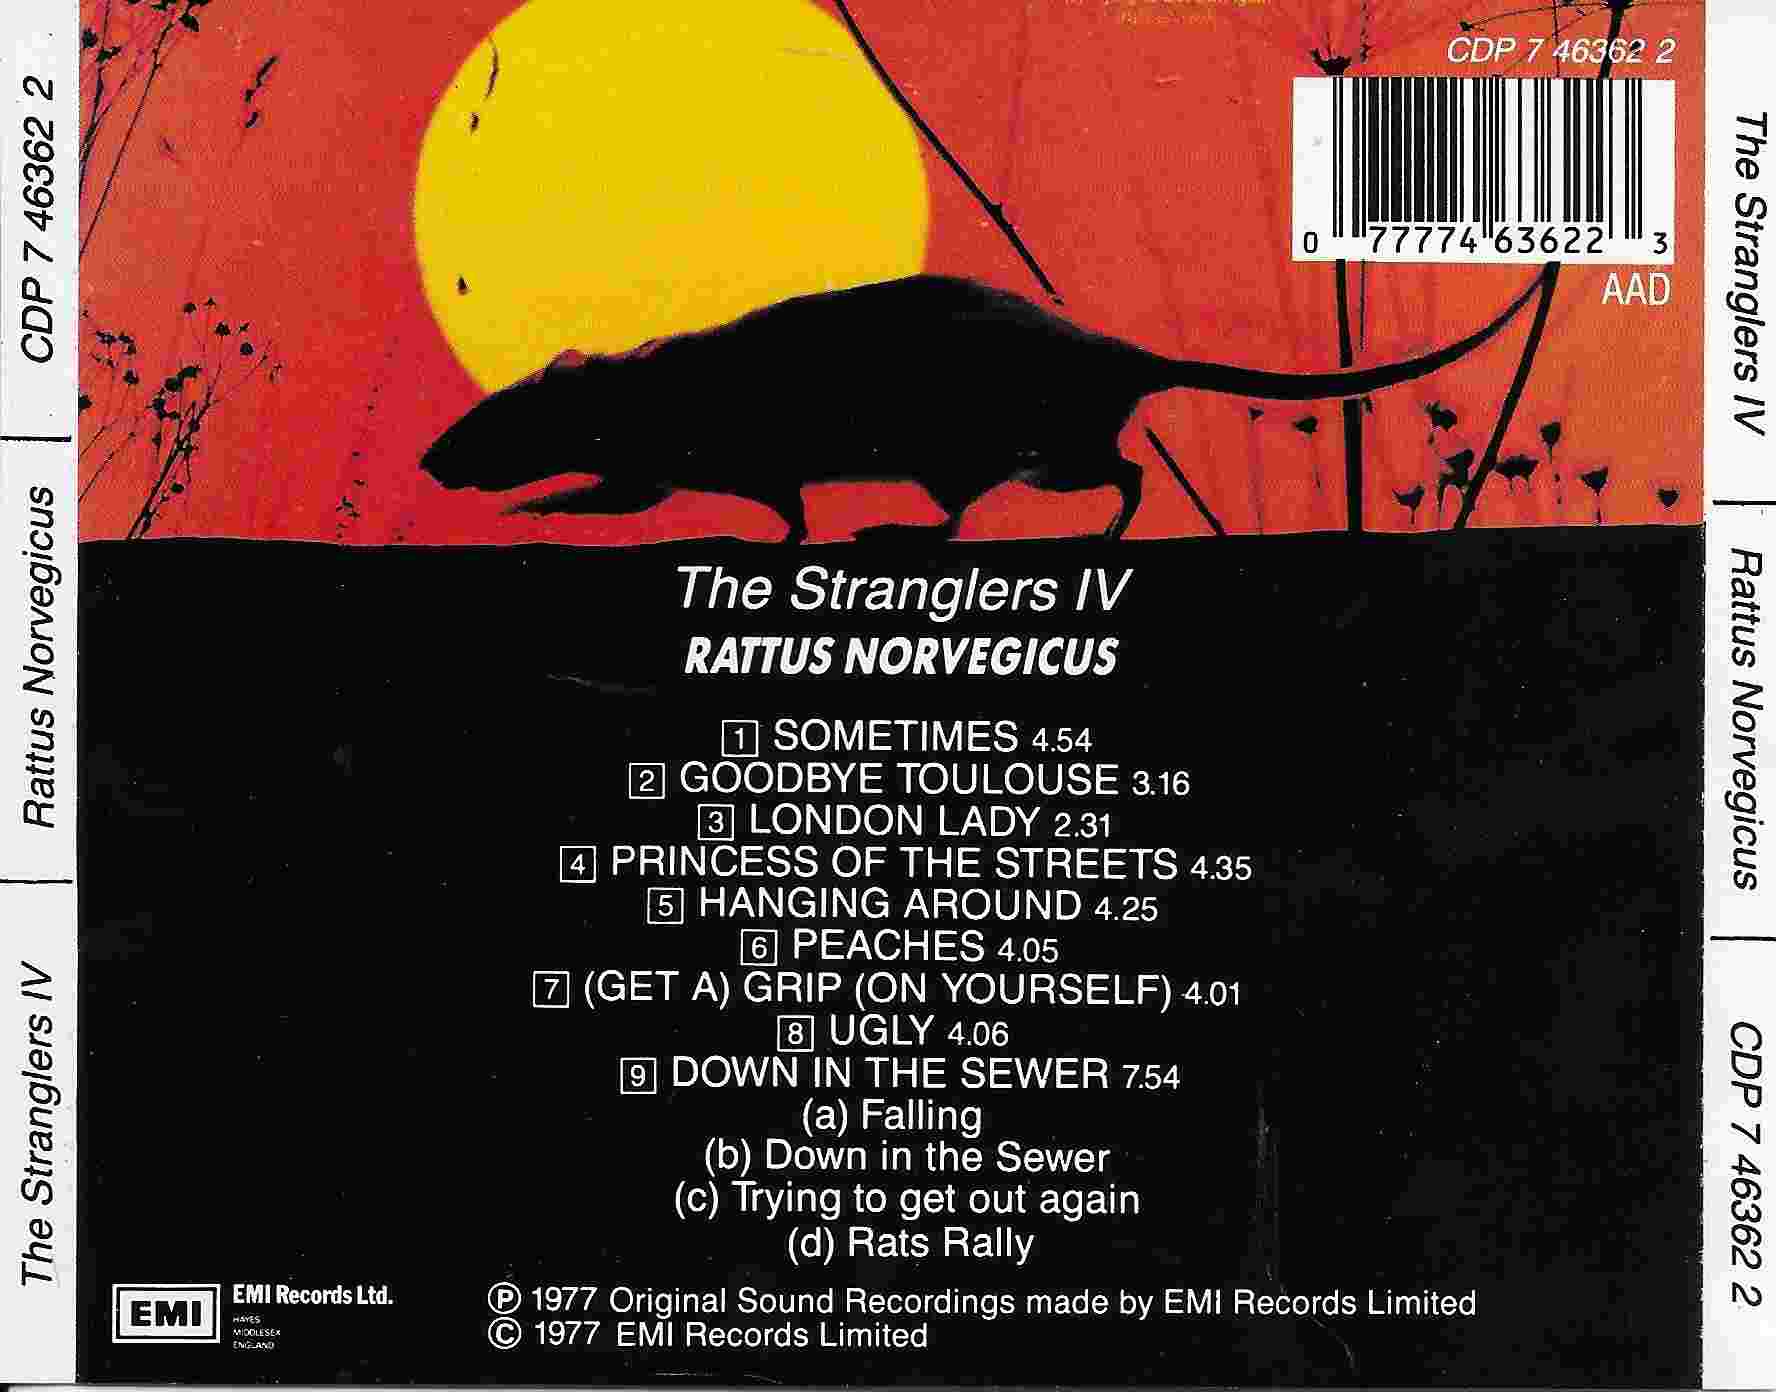 Picture of CDP 746362 2 Rattus norvegicus by artist The Stranglers from The Stranglers